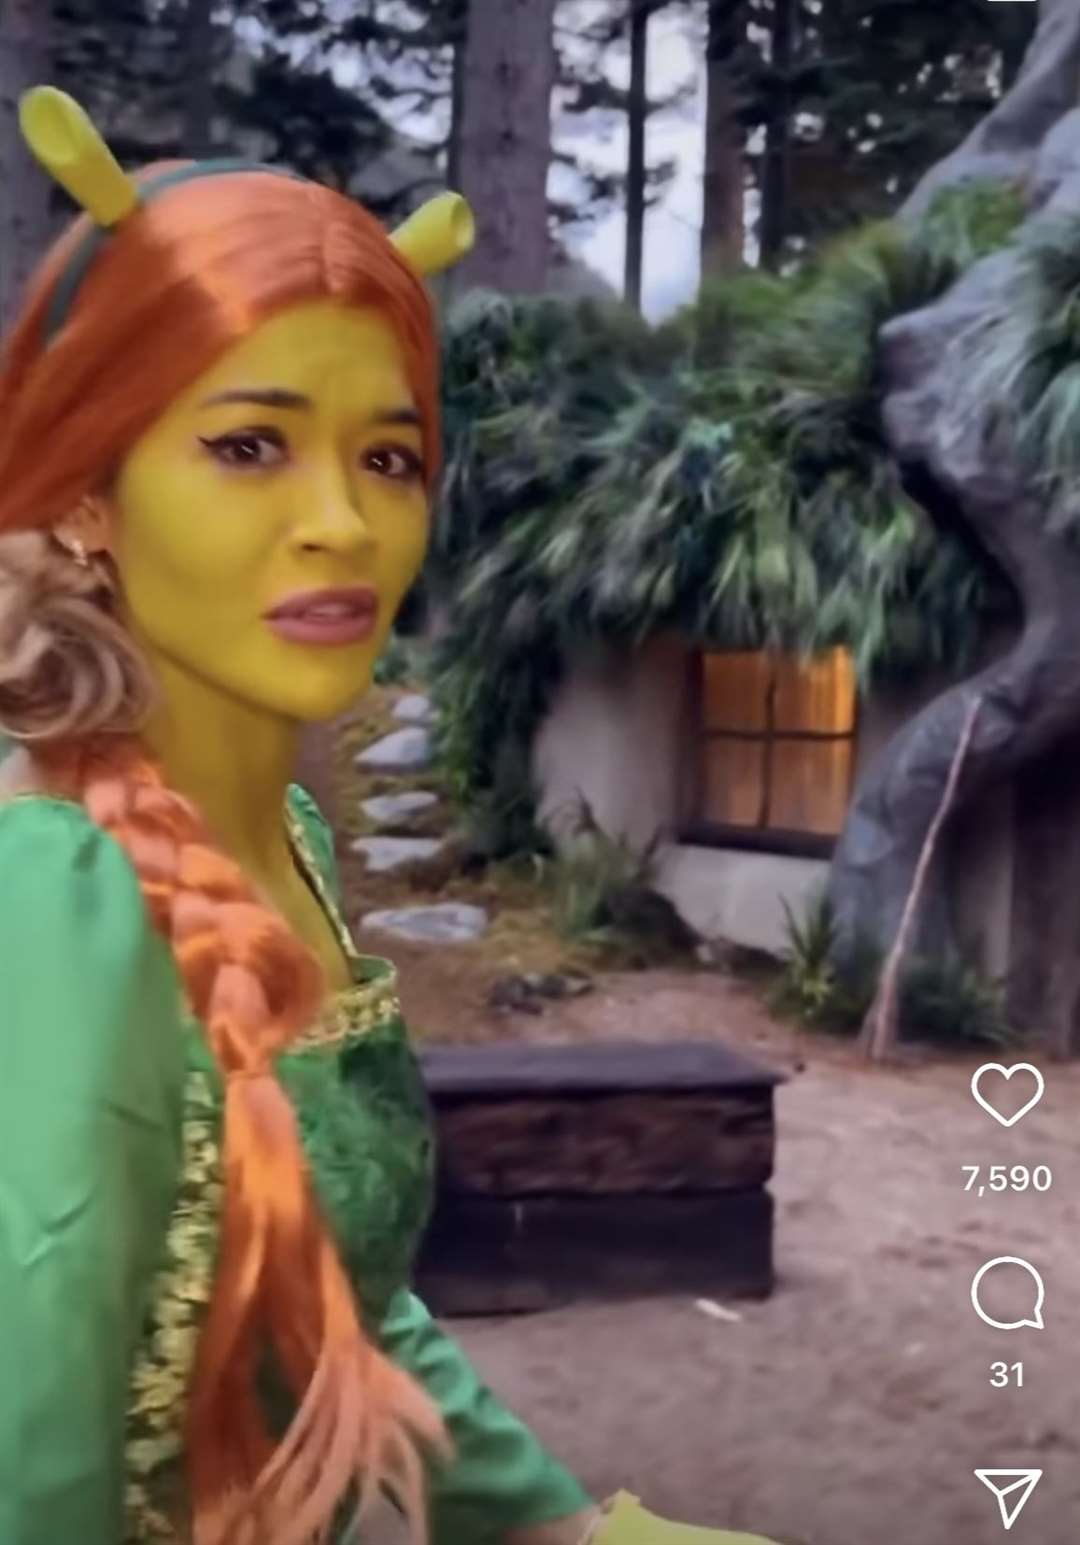 Rita Ora as Princess Fiona on her visit to the magical hideaway.